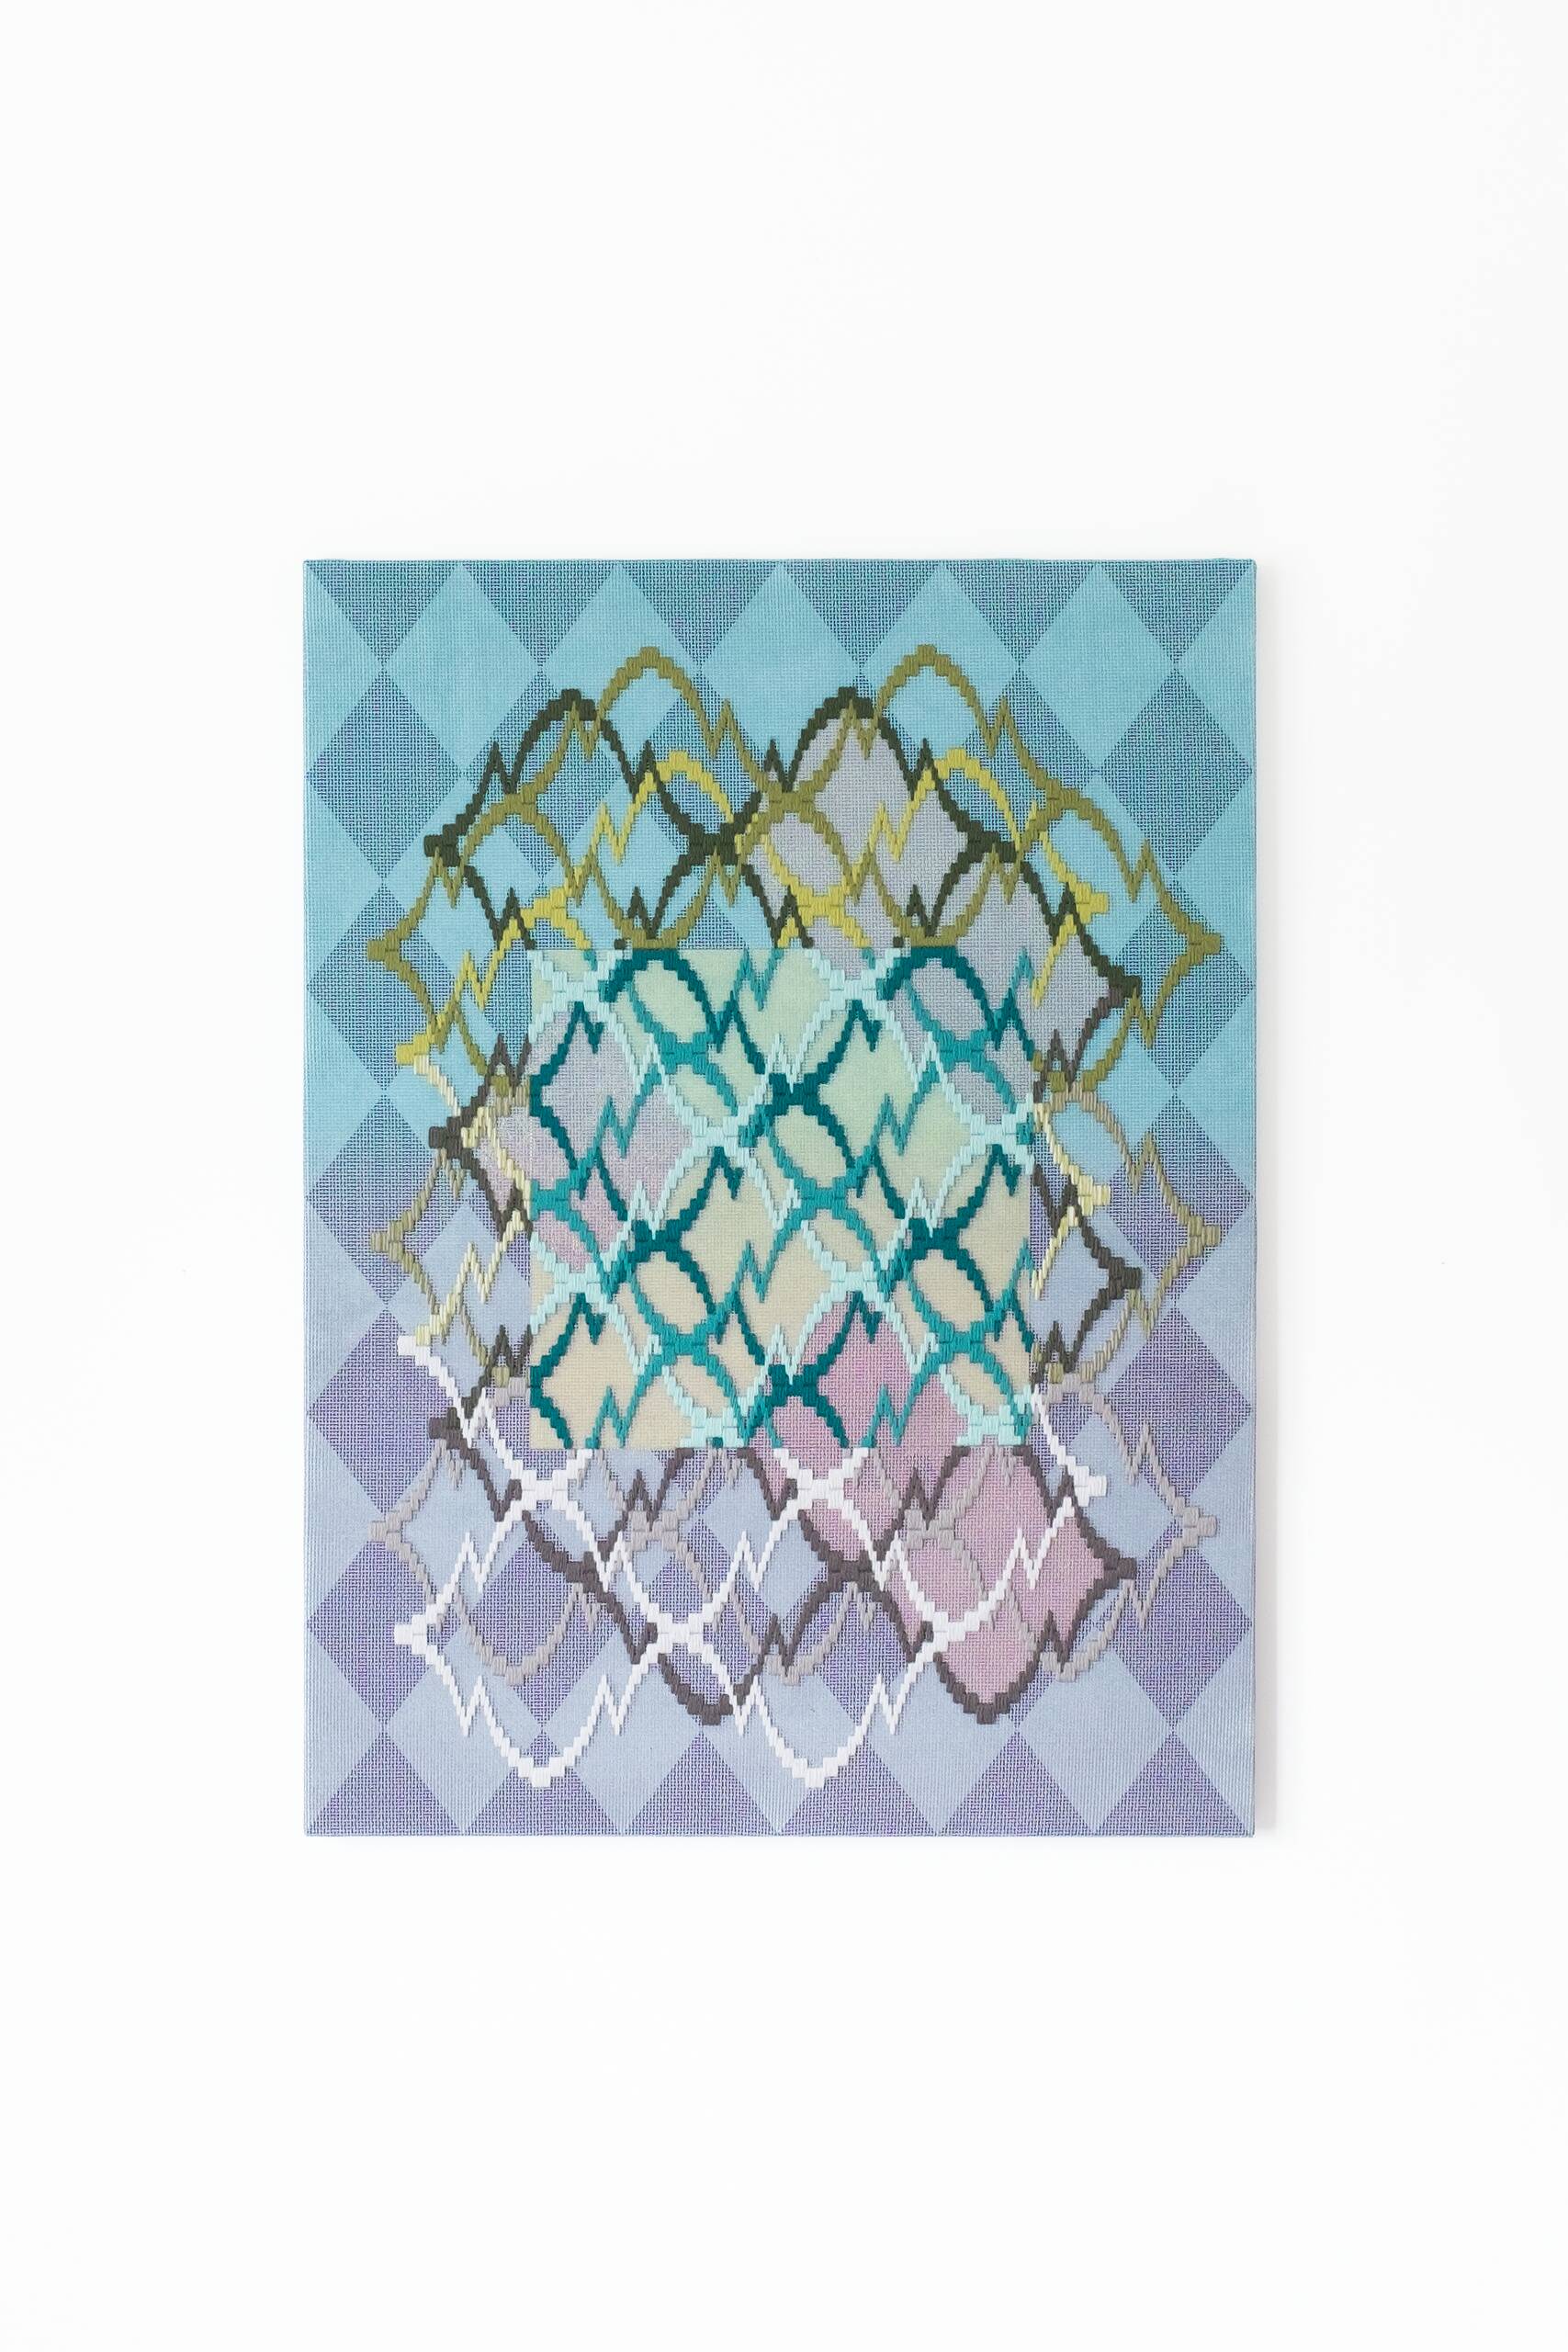 Pattern analysis [Golden Ratio, blue and purple], Hand-embroidered wool yarn and acrylic paint on canvas over painted and gilded panel, 2022